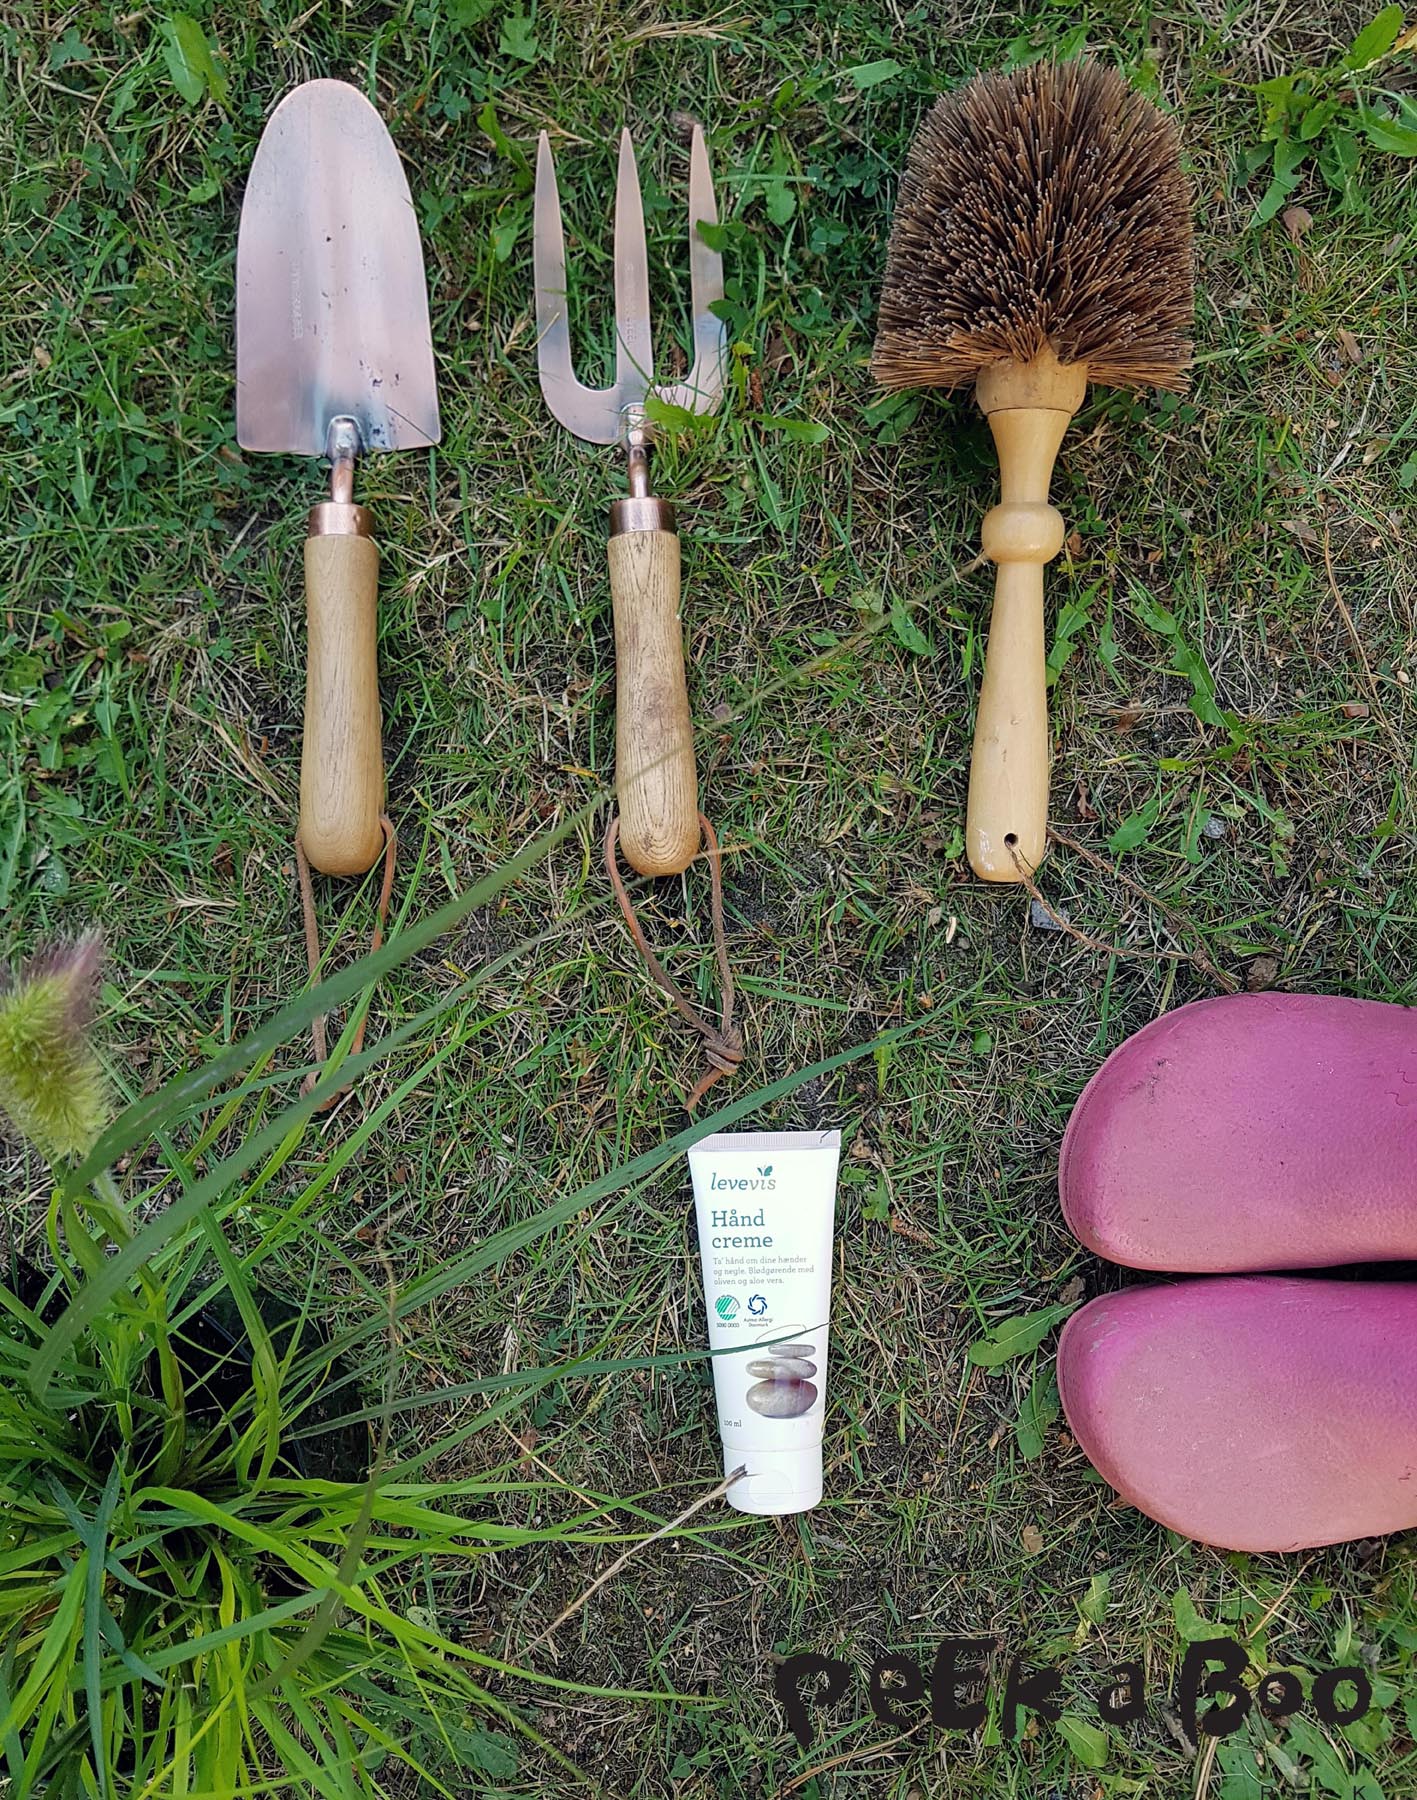 Garden tools from Ellos in brass and tree and a brush for your pots. The hand lotion I use is from Levevis. All the plants are from Gartneriet Pedersen.